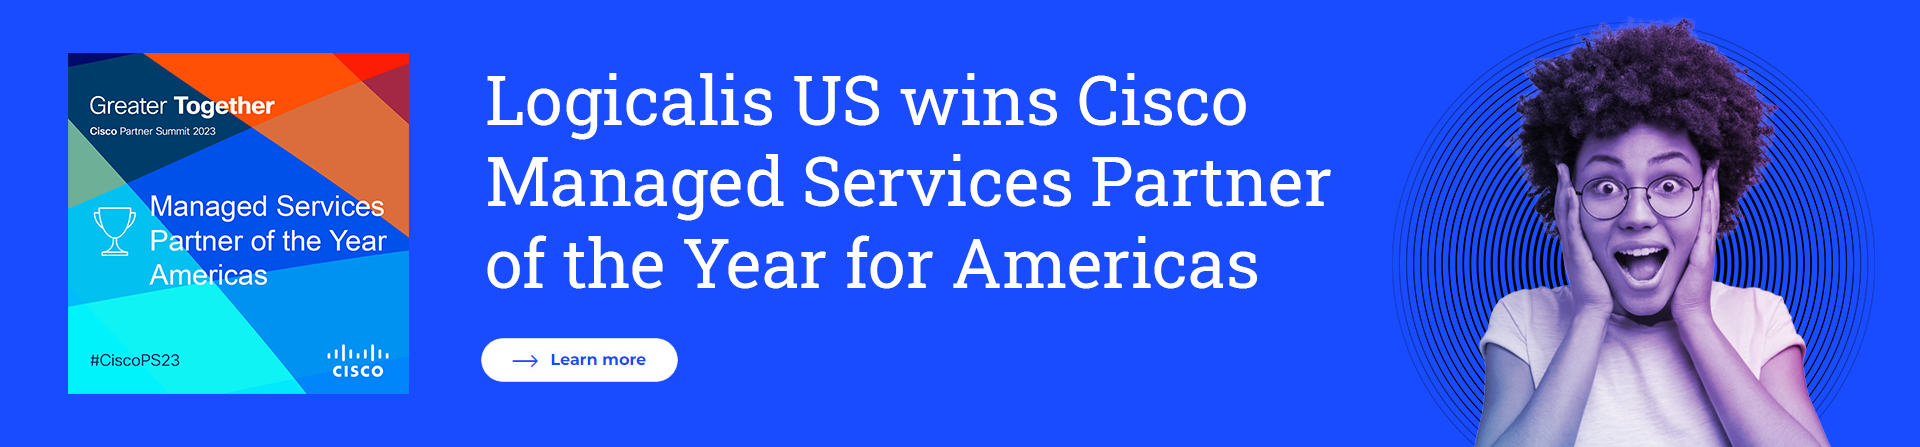 Logicalis wins Cisco Americas Managed Services Partner of the Year award